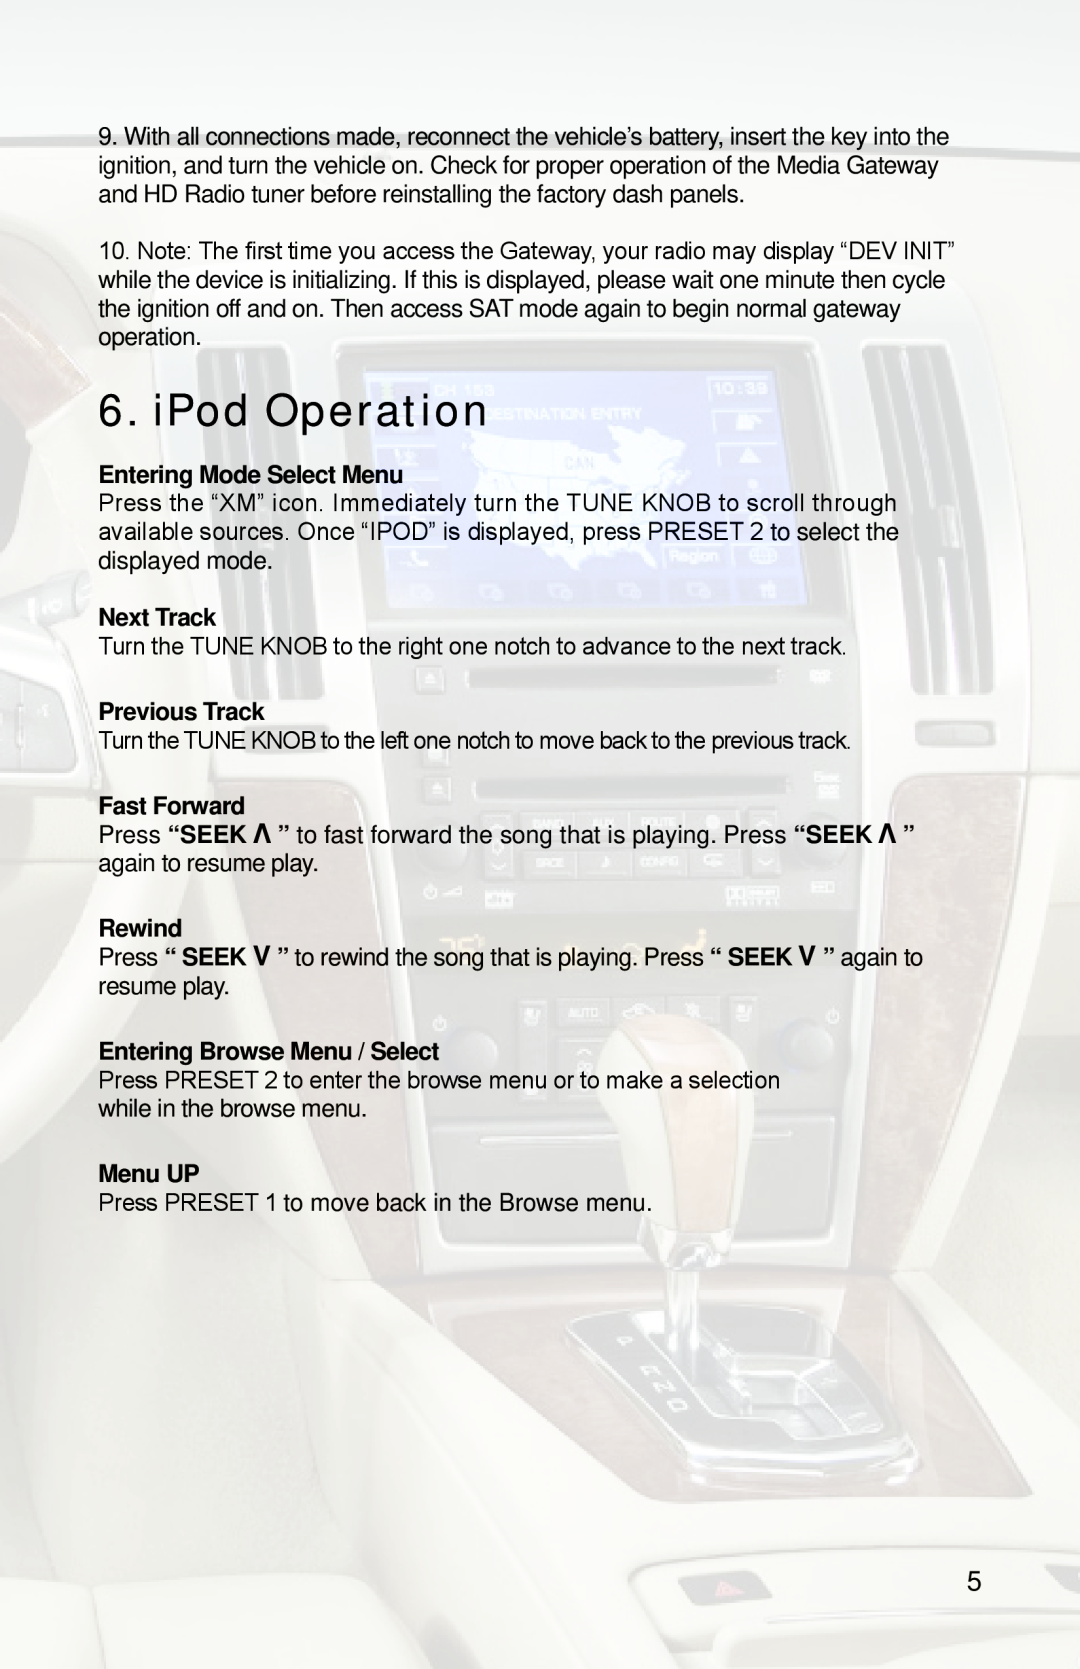 iSimple PGHGM4 iPod Operation, Entering Mode Select Menu, Next Track, Previous Track, Fast Forward, Rewind, Menu UP 